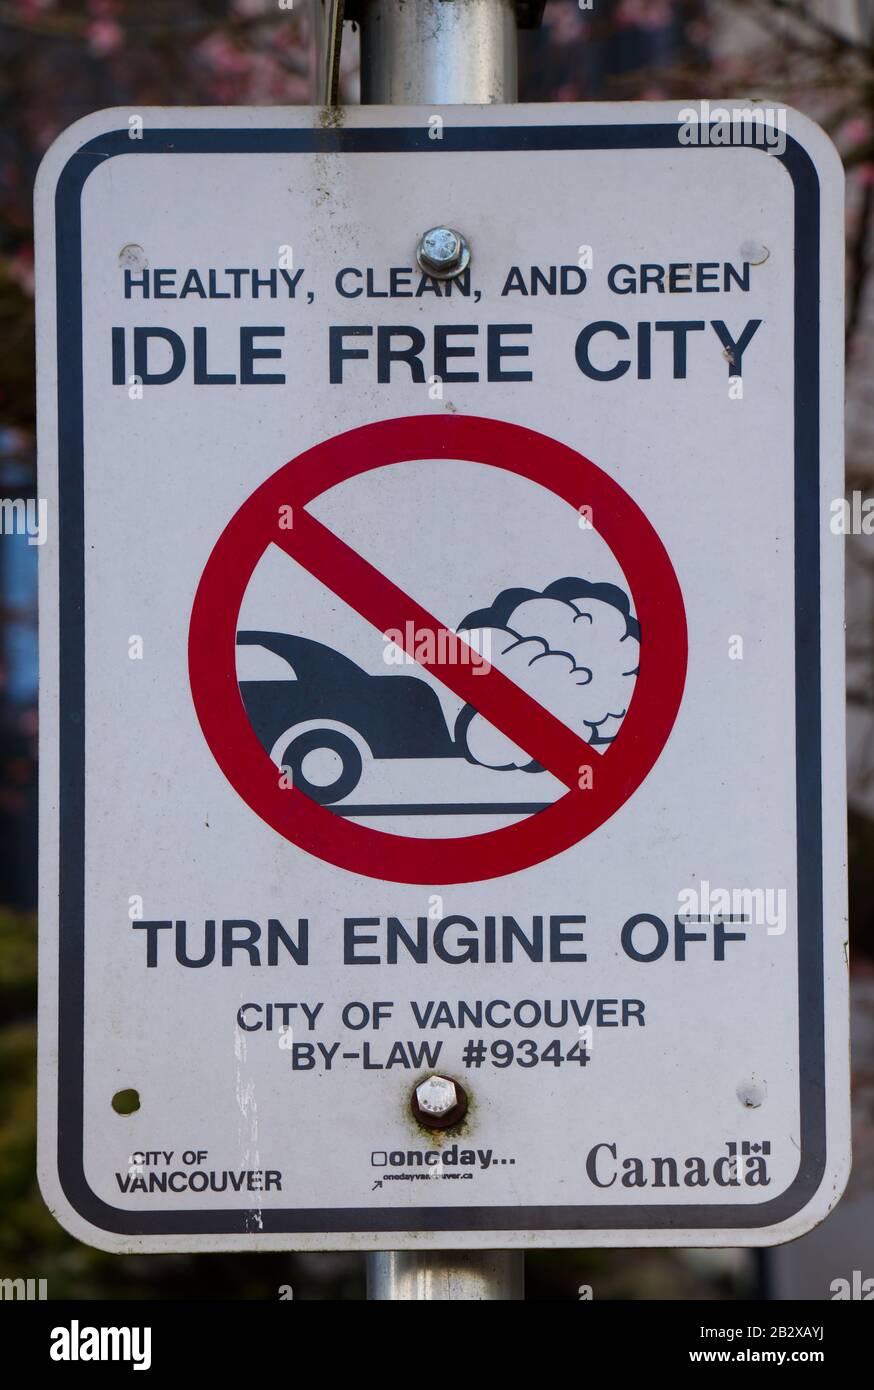 Vancouver, Canada - February 17, 2020: View of road sign 'Idle Free City' near Vancouver City Hall Building Stock Photo